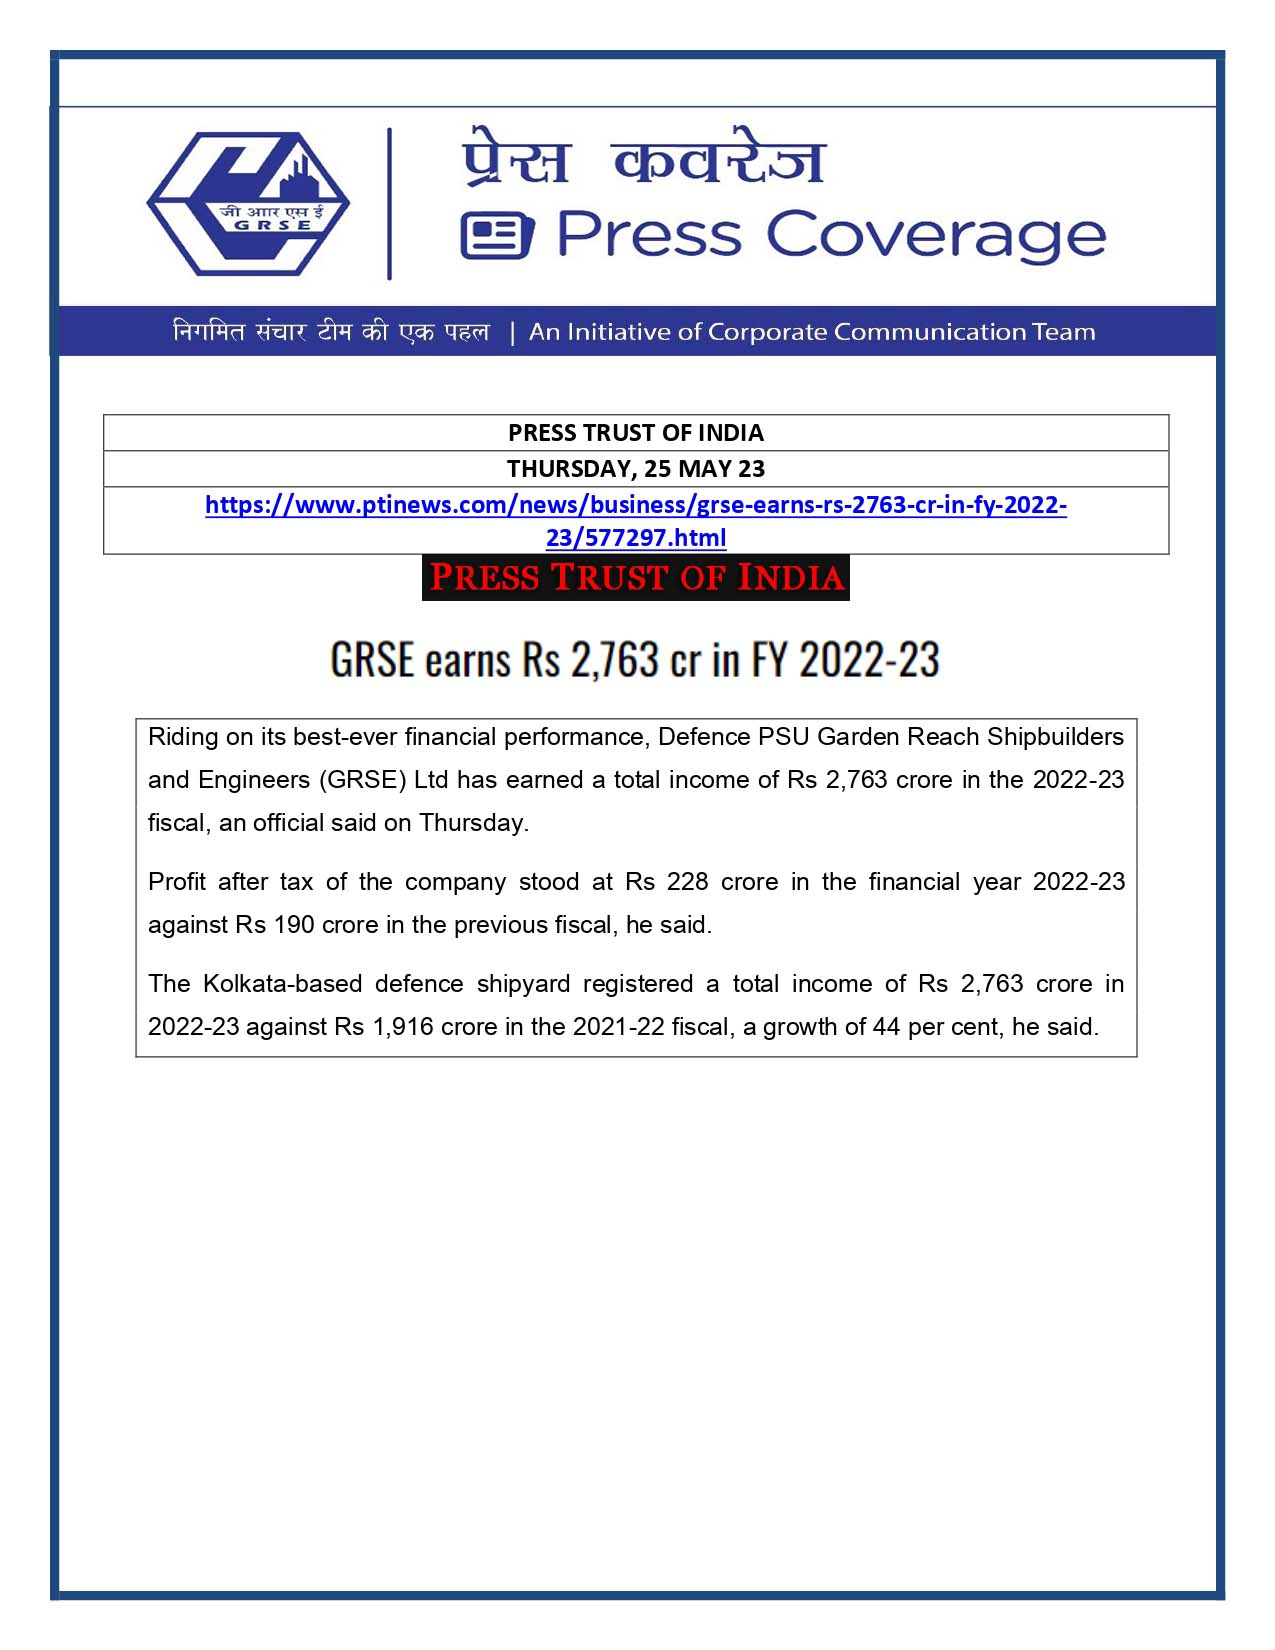 GRSE earns Rs 2,763 cr in FY 2022-23